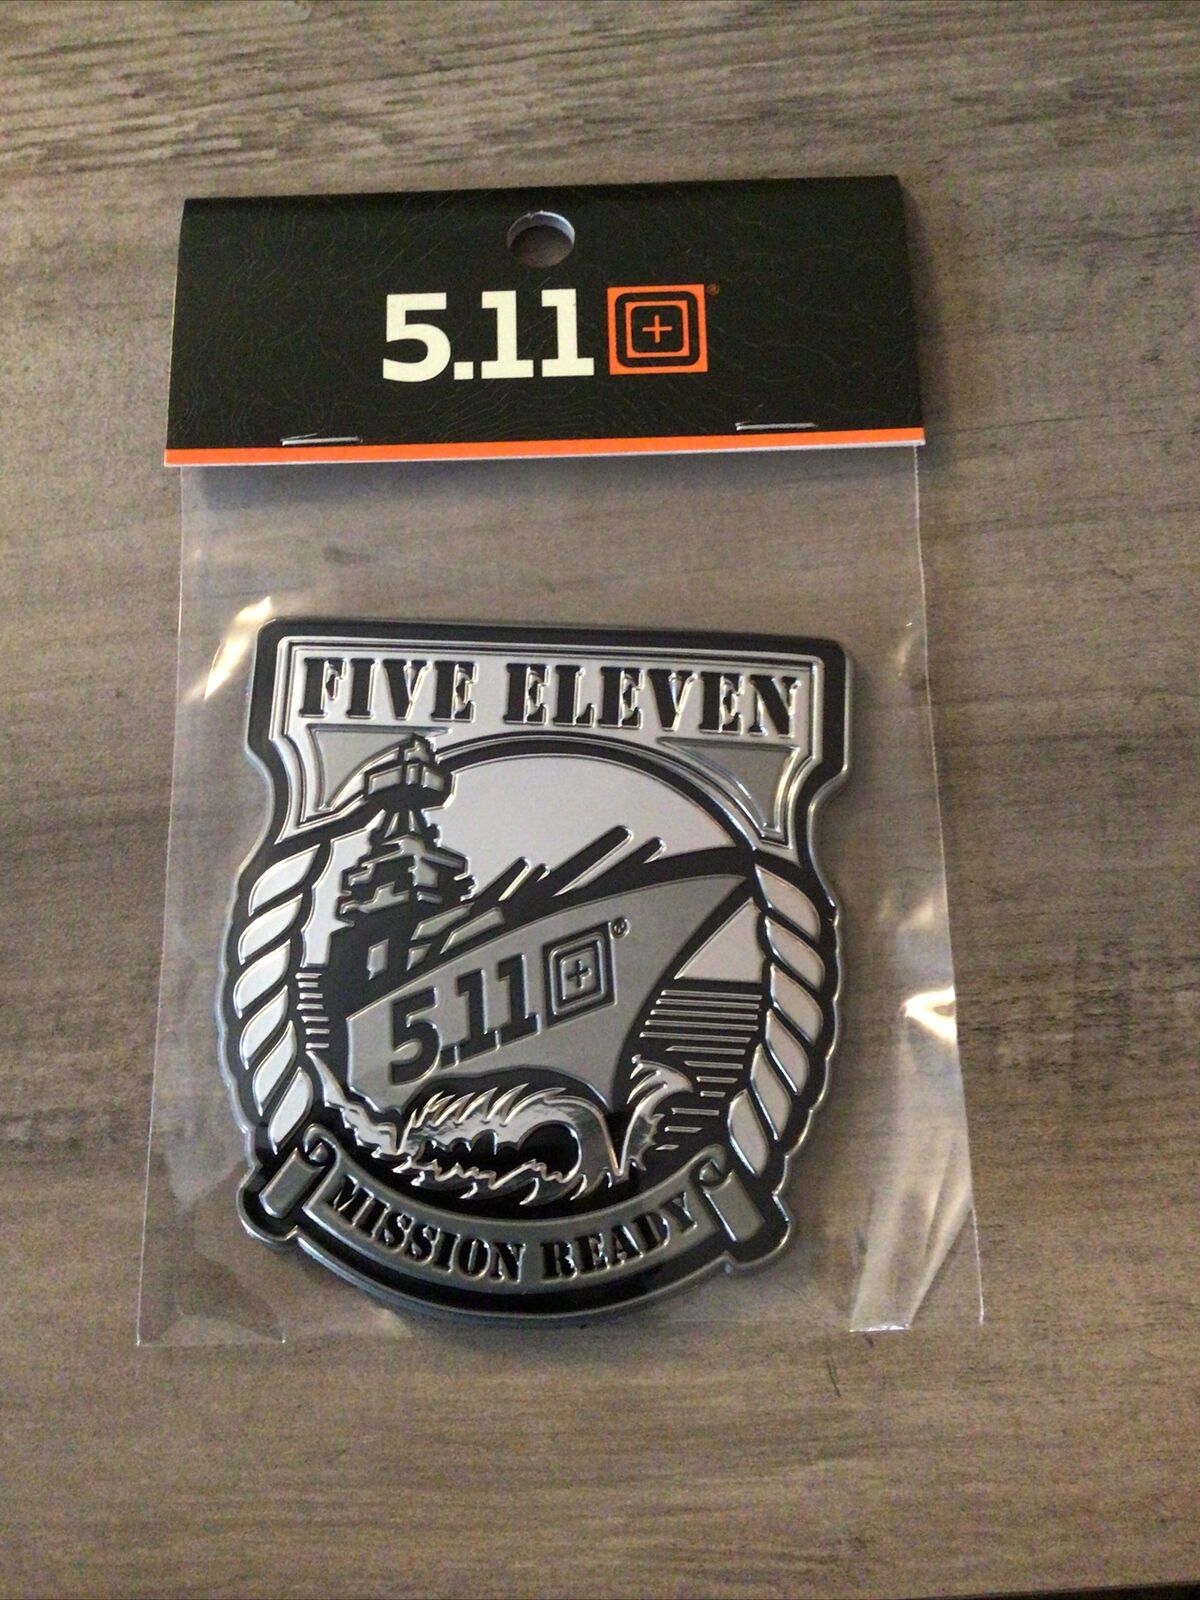 5.11 TACTICAL “FUCCY SON OF A BENCH”PATCH HOOK/LOOP BACKING NEW.